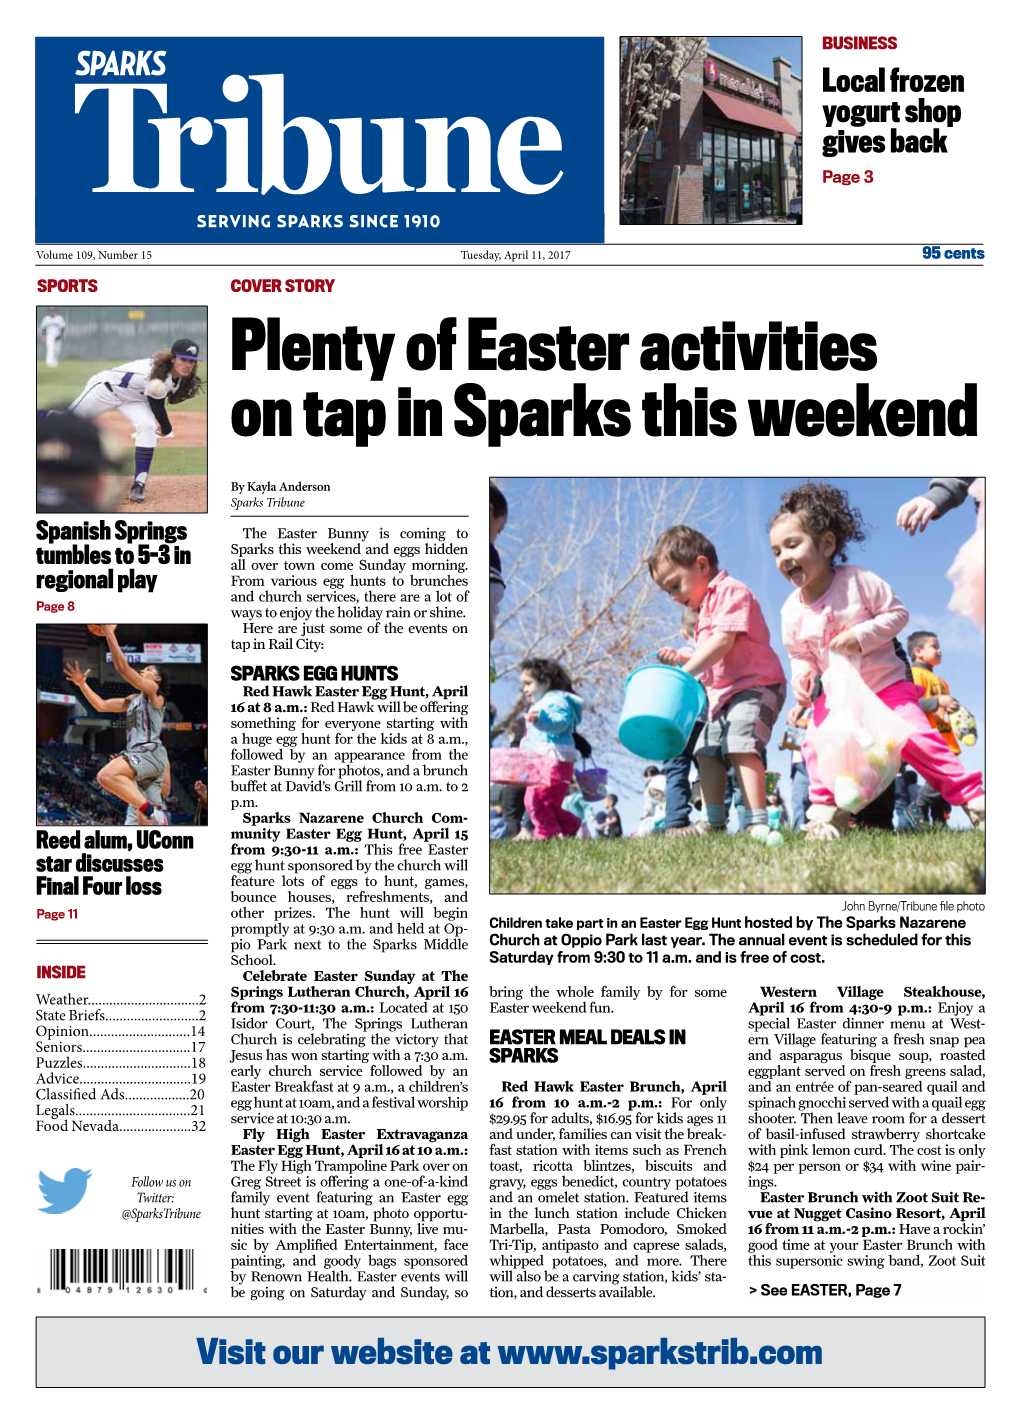 Sparks Tribune Spanish Springs the Easter Bunny Is Coming to Sparks This Weekend and Eggs Hidden Tumbles to 5-3 in All Over Town Come Sunday Morning